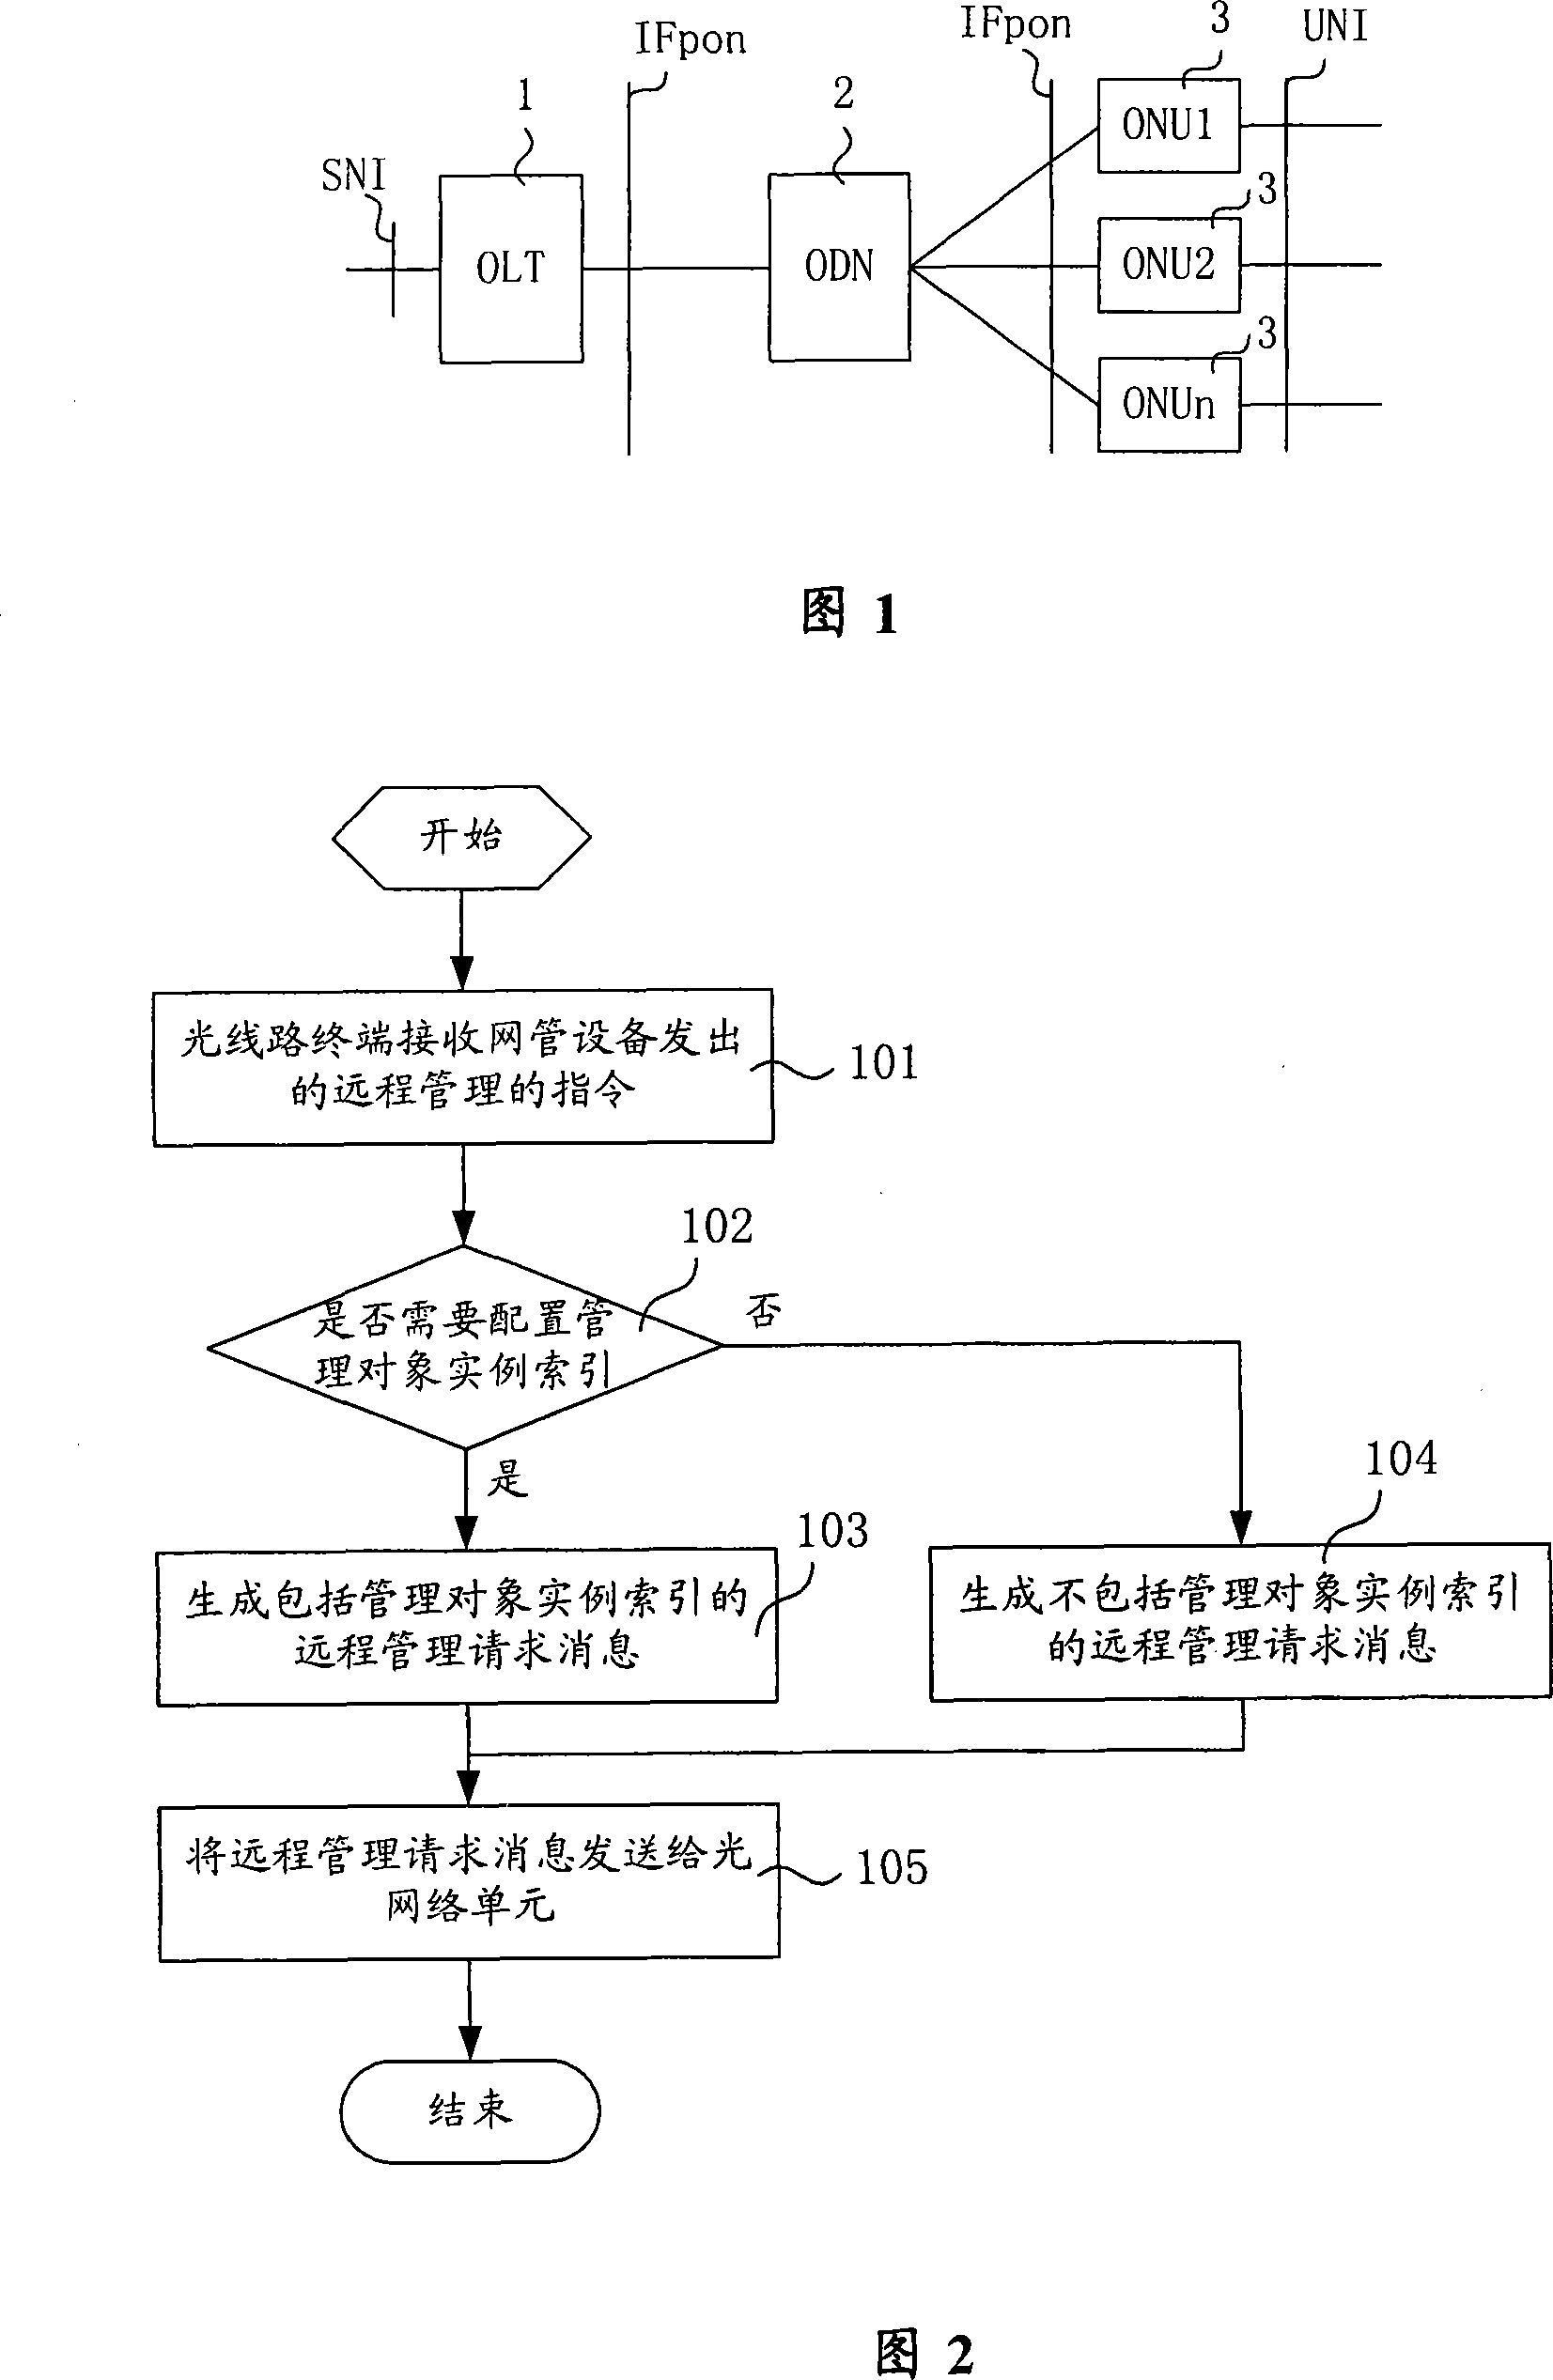 Tele-management method and system for optical network unit